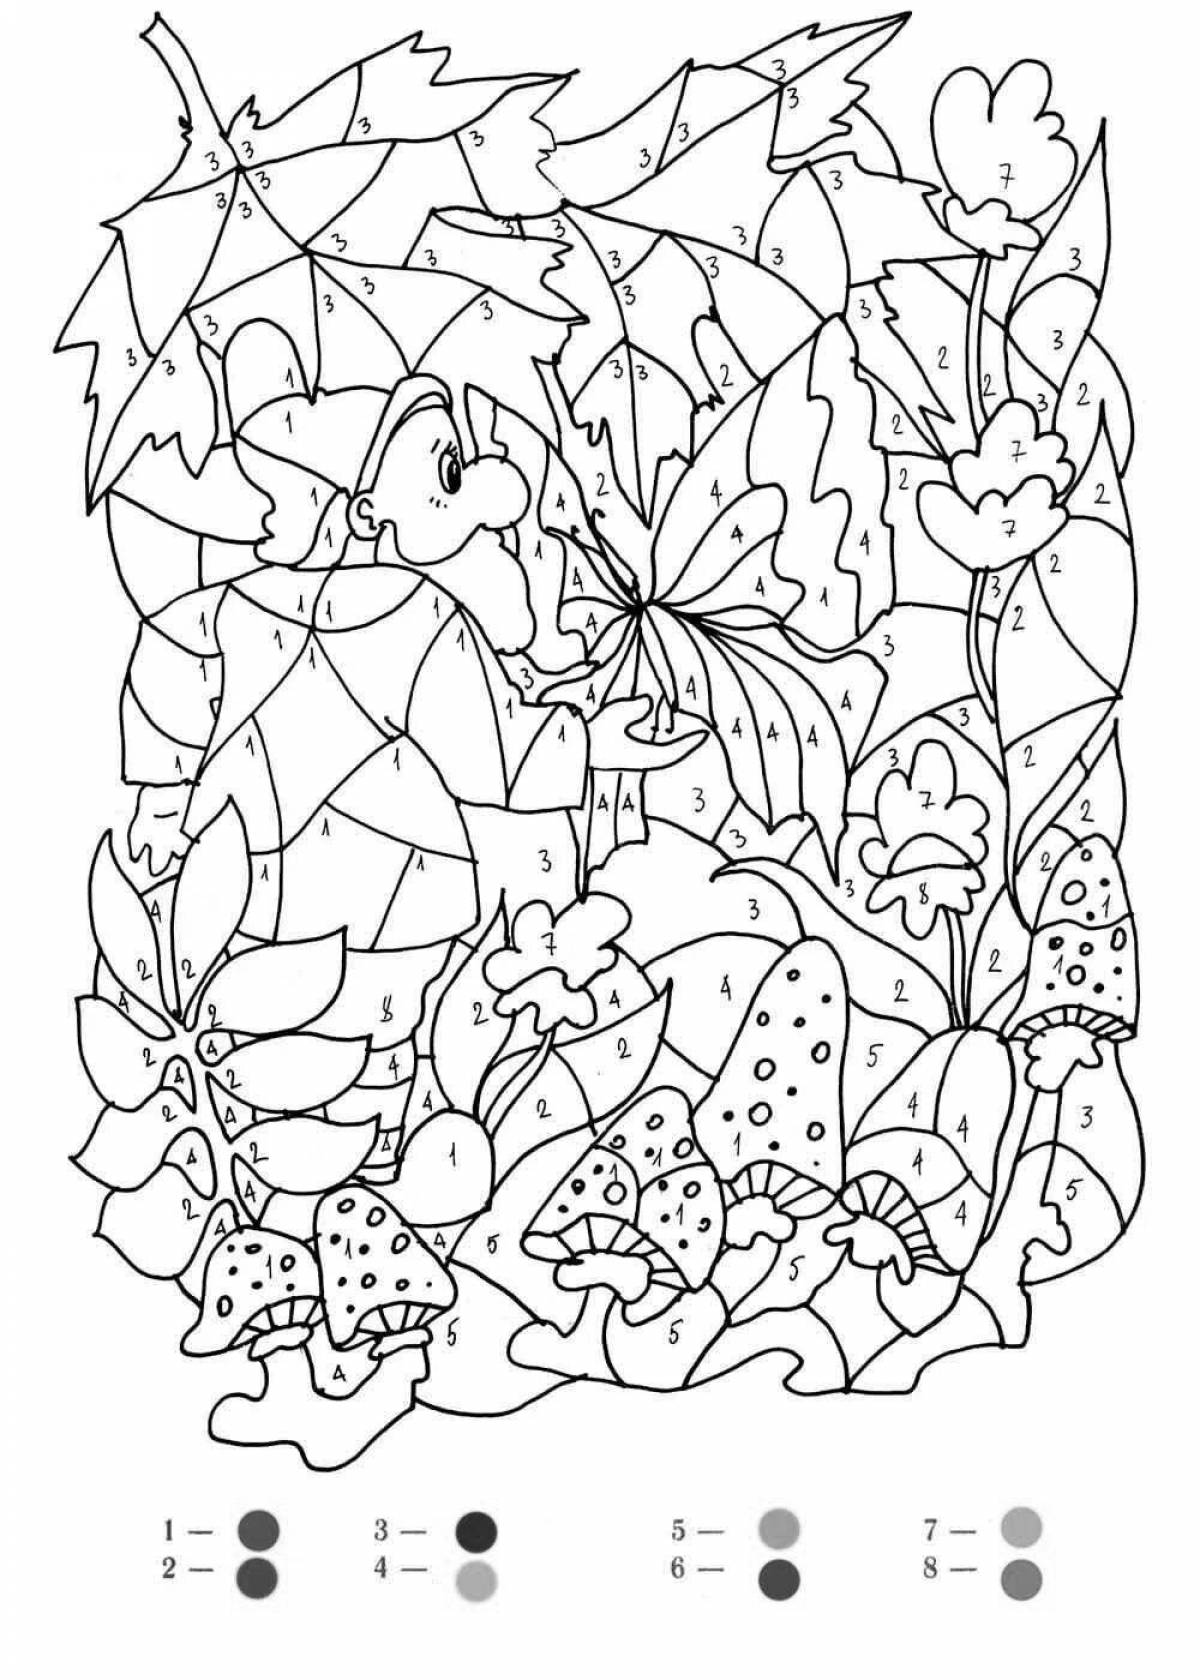 Color-explosion download by numbers coloring page